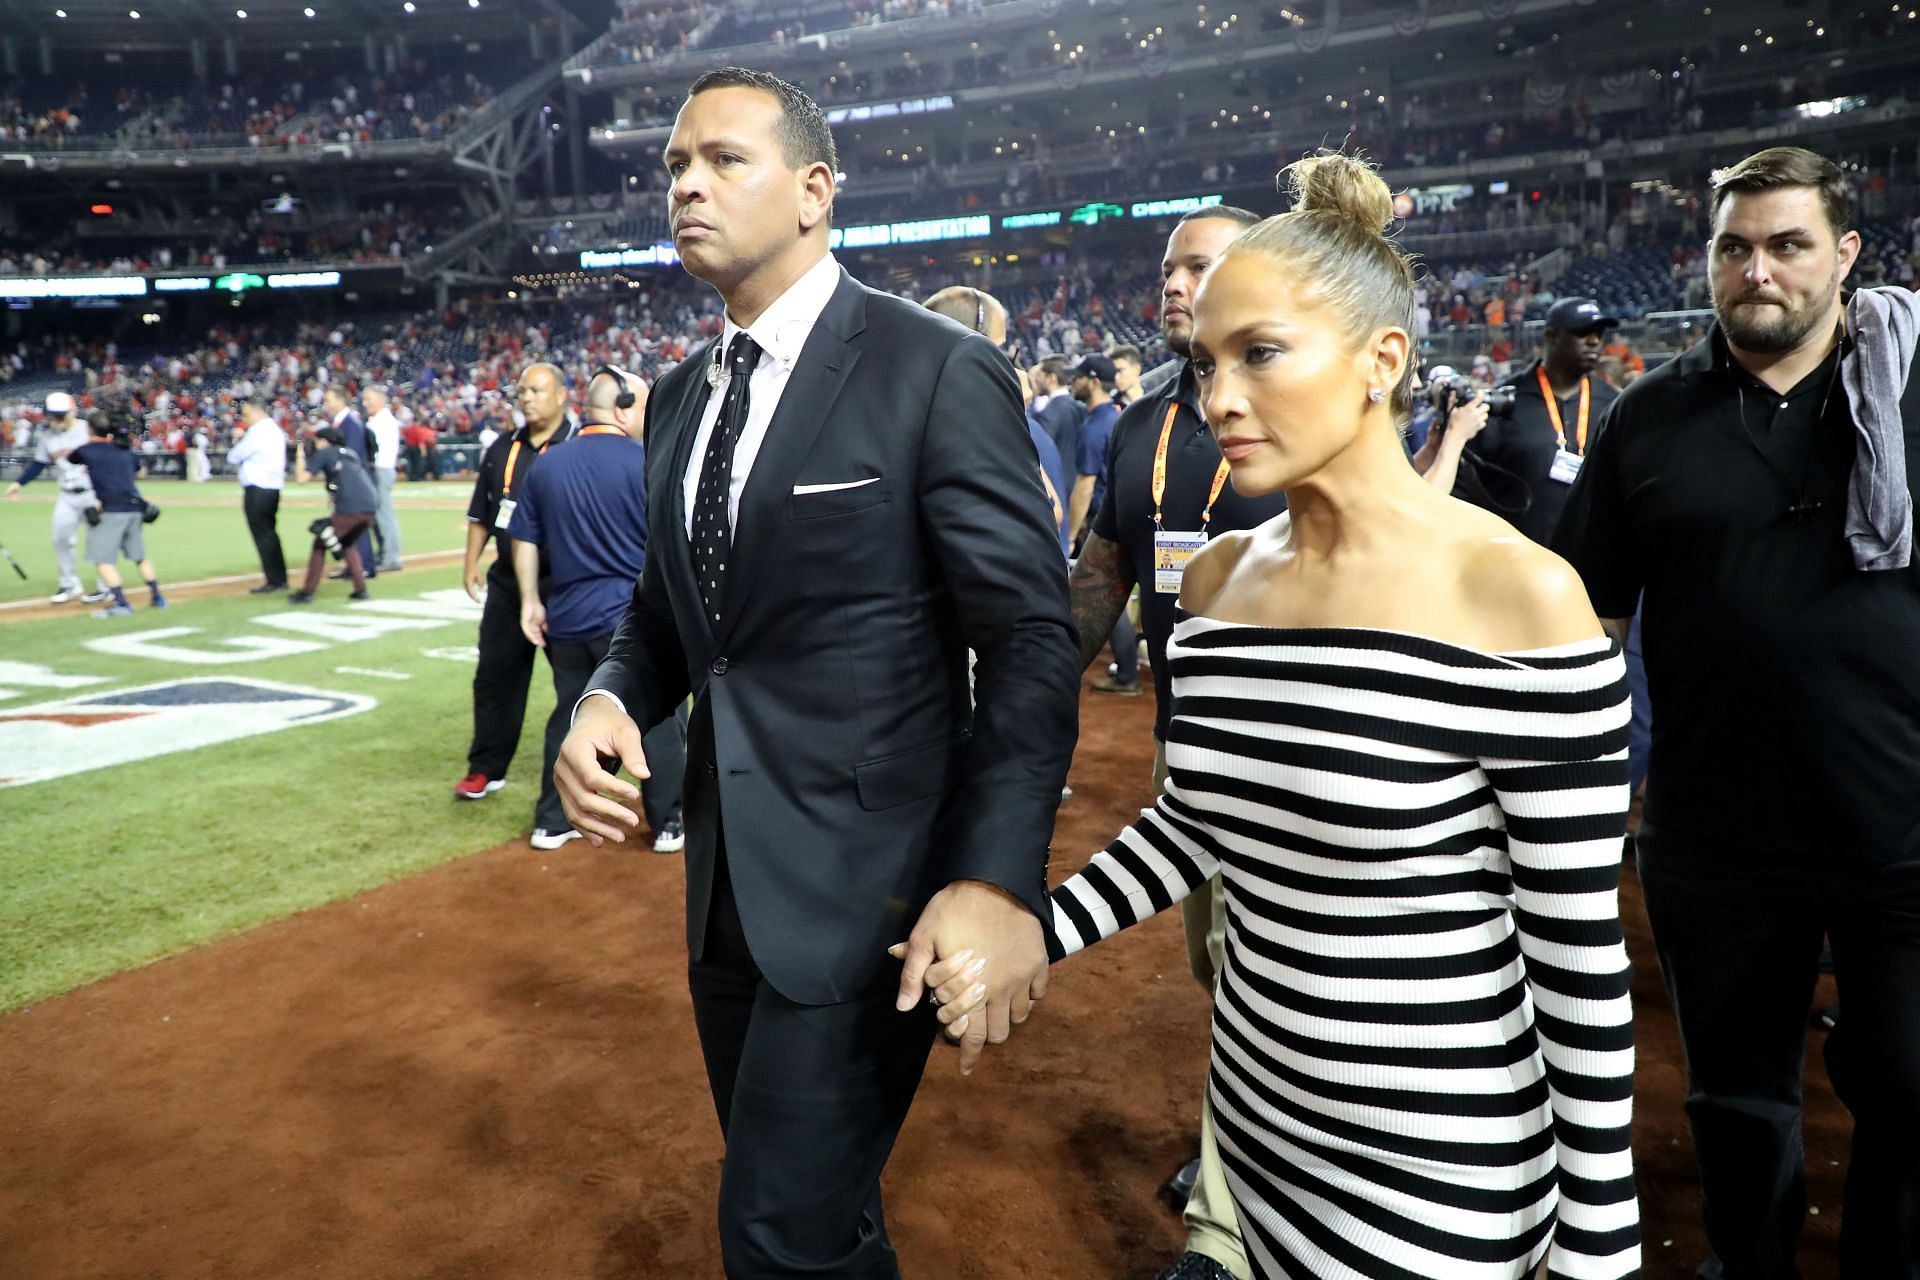 Alex Rodriguez and Lopez were together for nearly four years until their breakup in 2021.